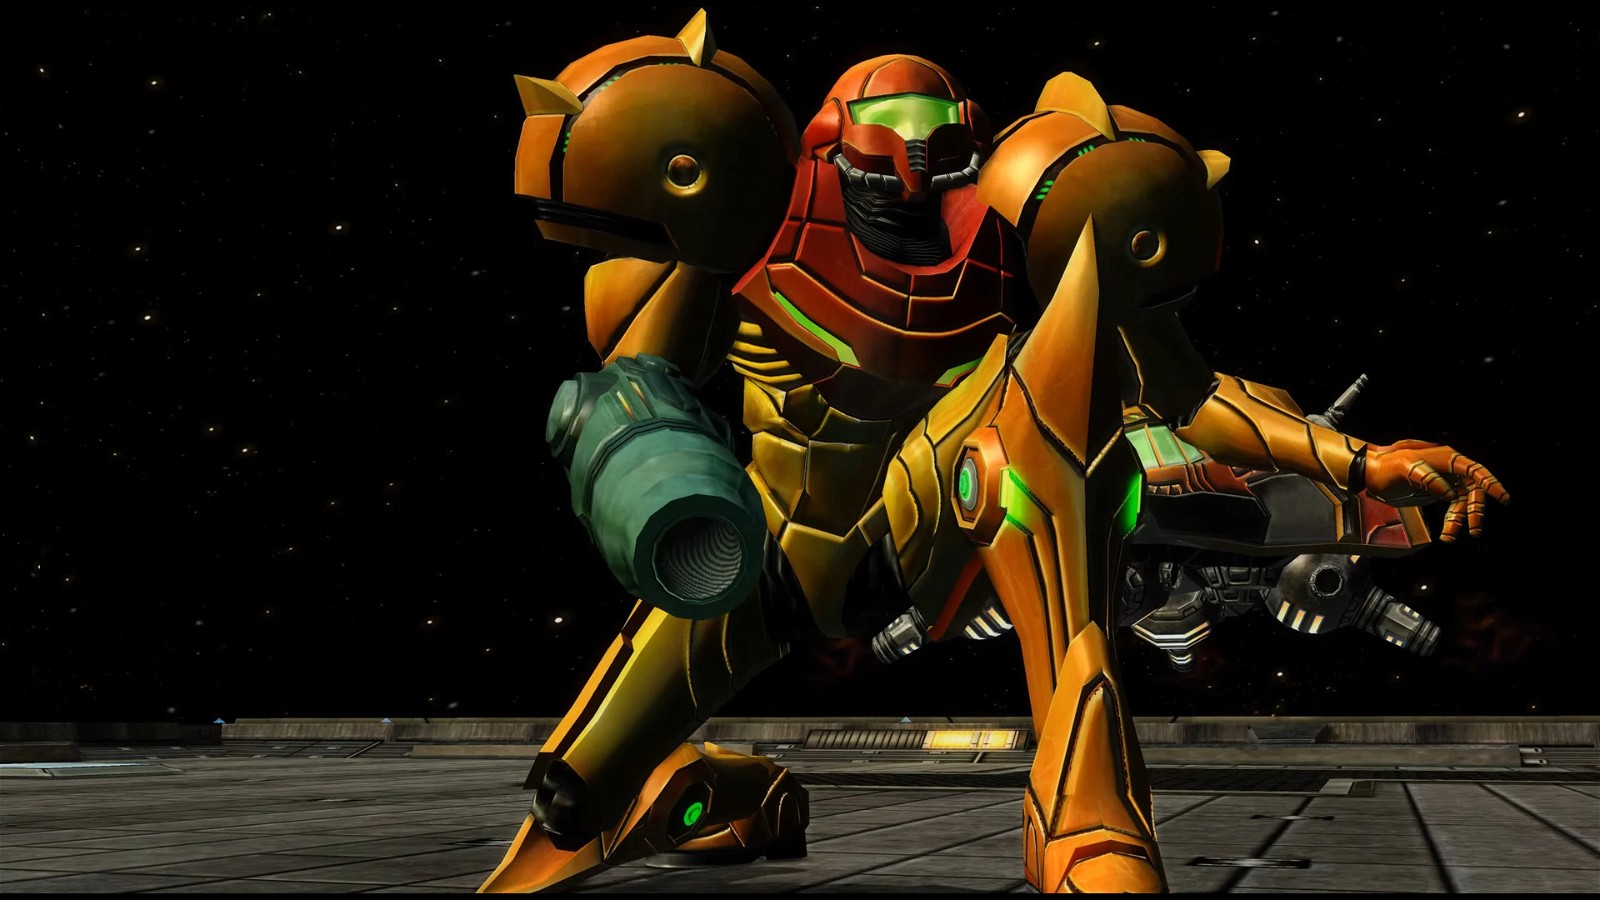 Metroid Prime 4 May Finally Be Close to Release